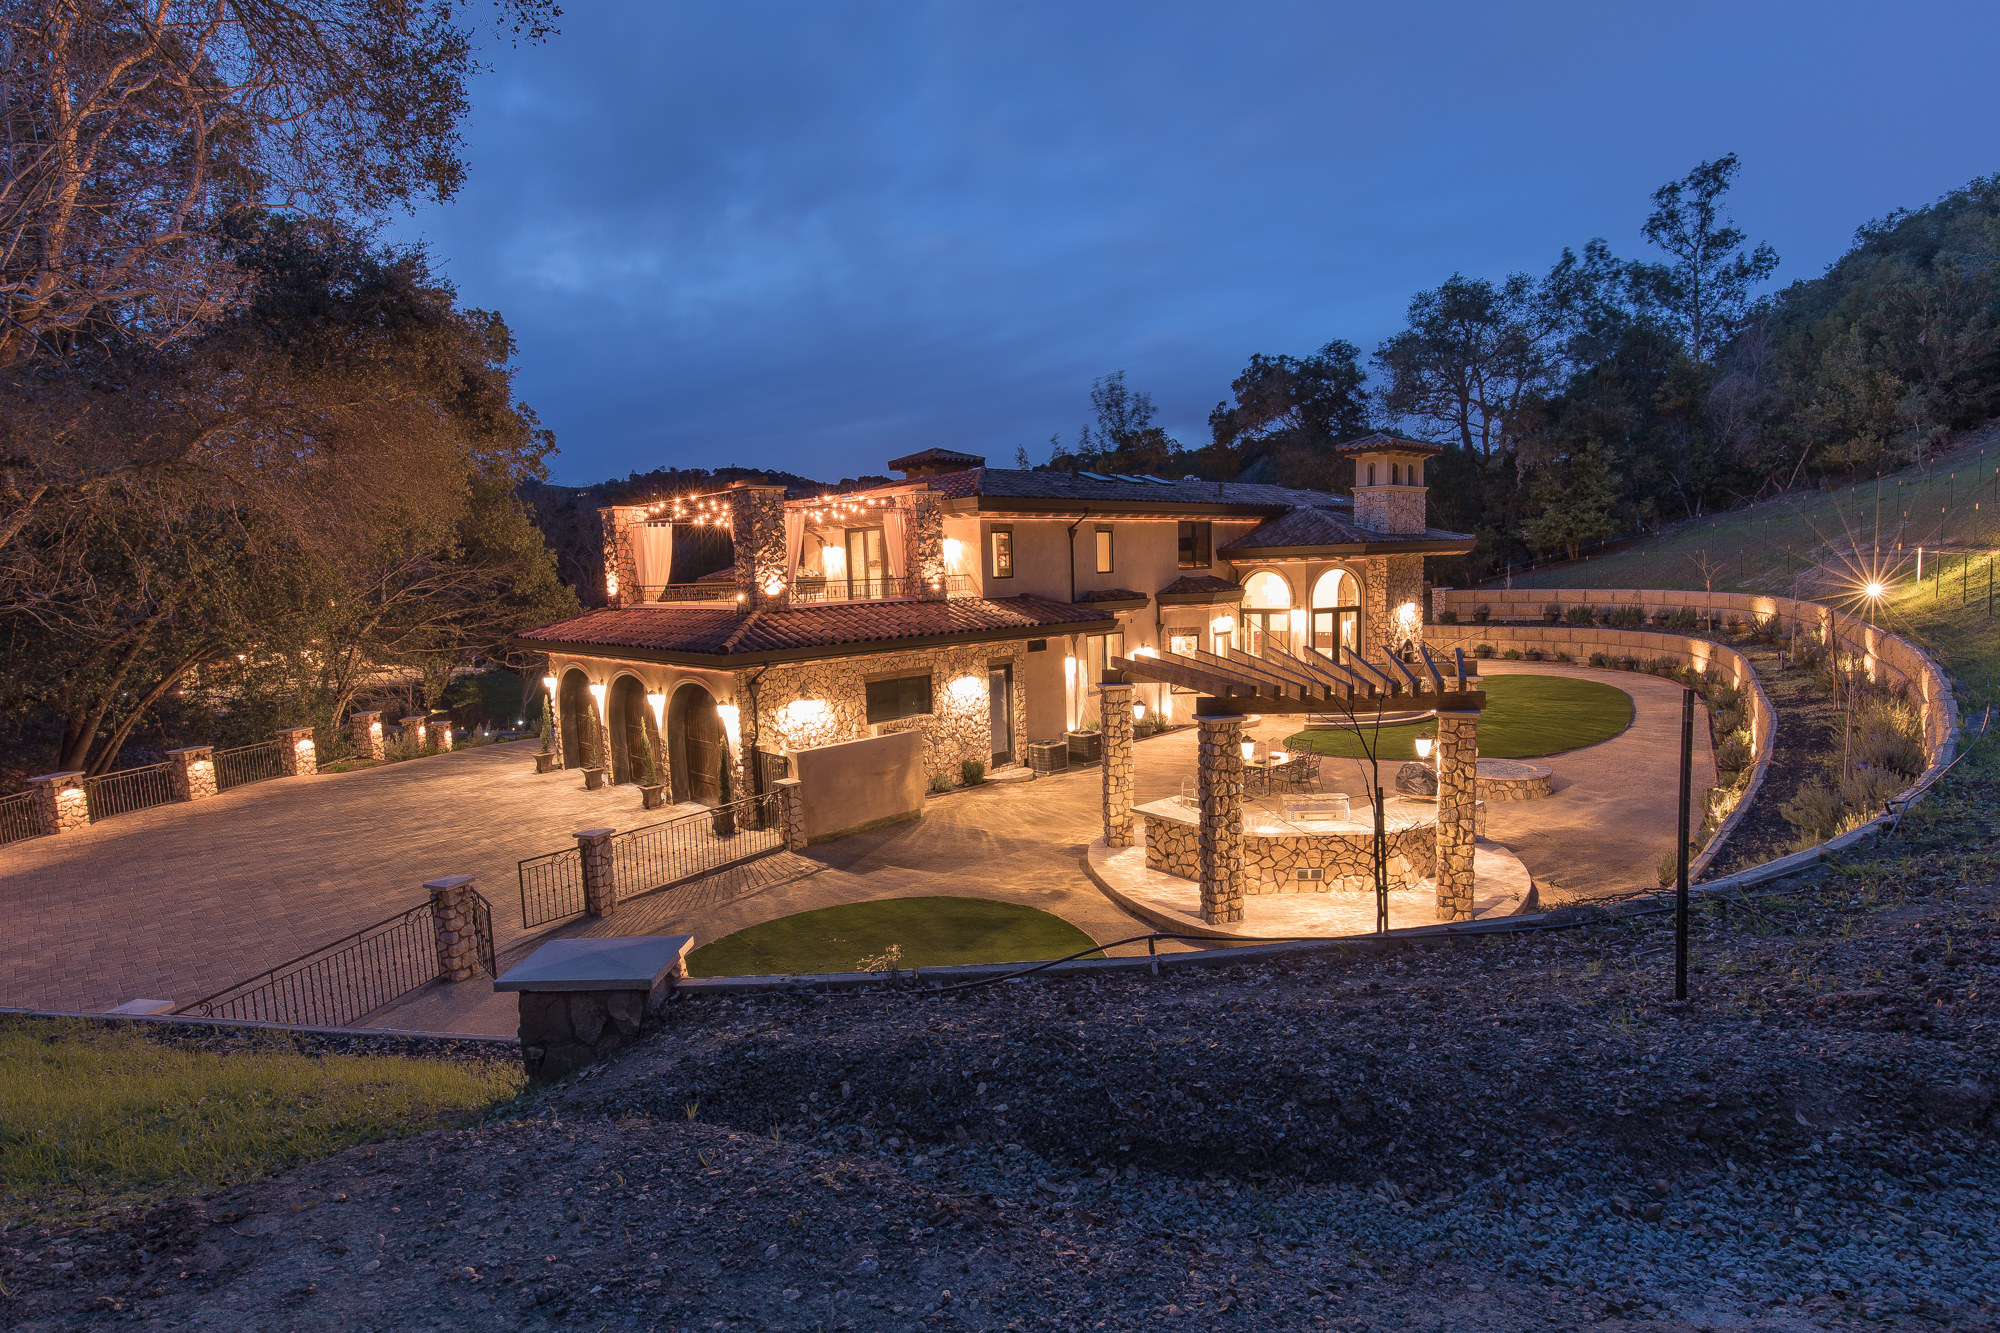  Extensive outdoor lighting illuminates the space and provides the perfect ambiance for entertainment or relaxation 